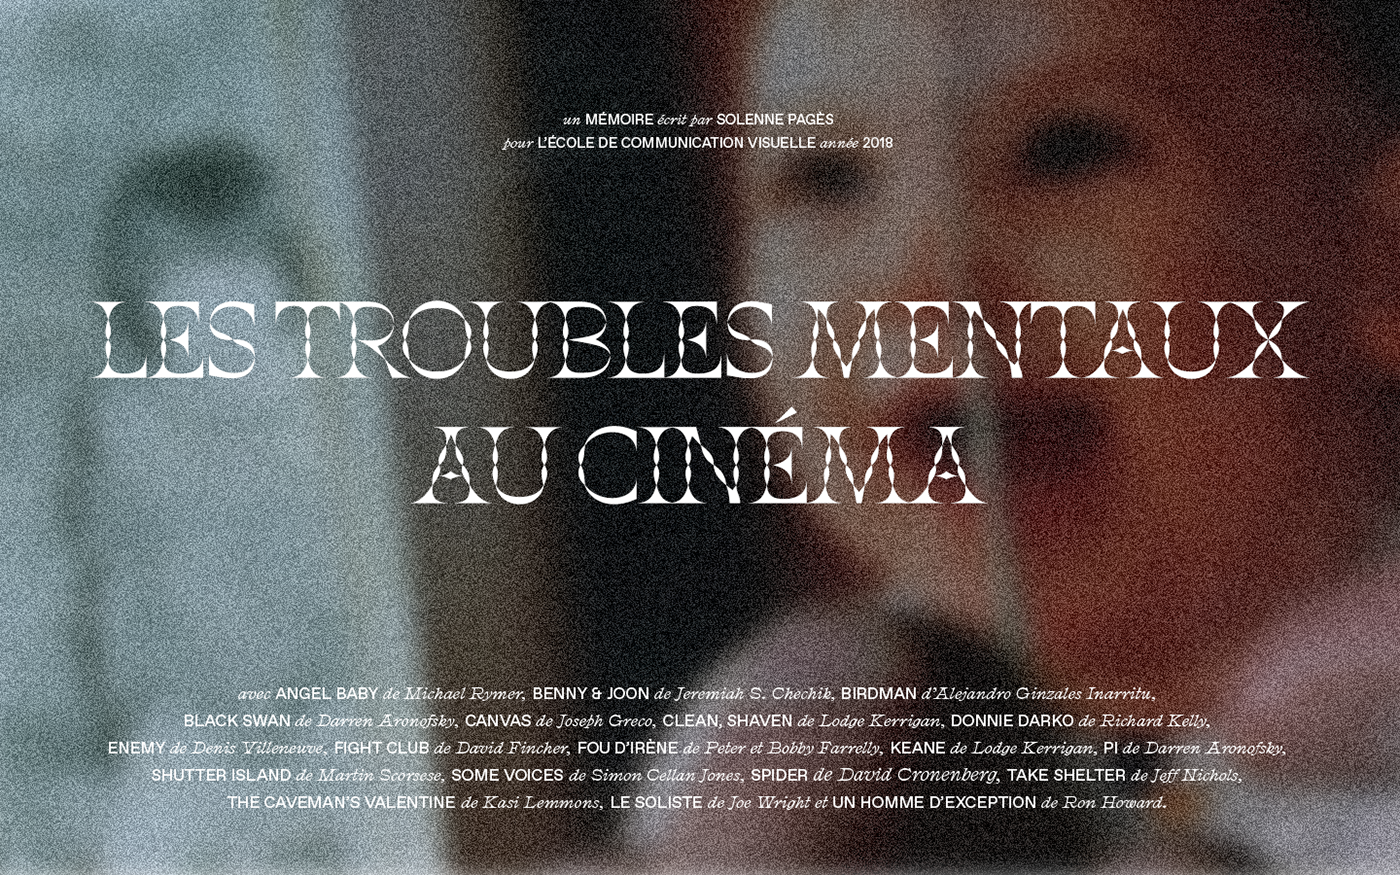 thesis editorial movie mental health typography   book grid Film   Mémoire bw